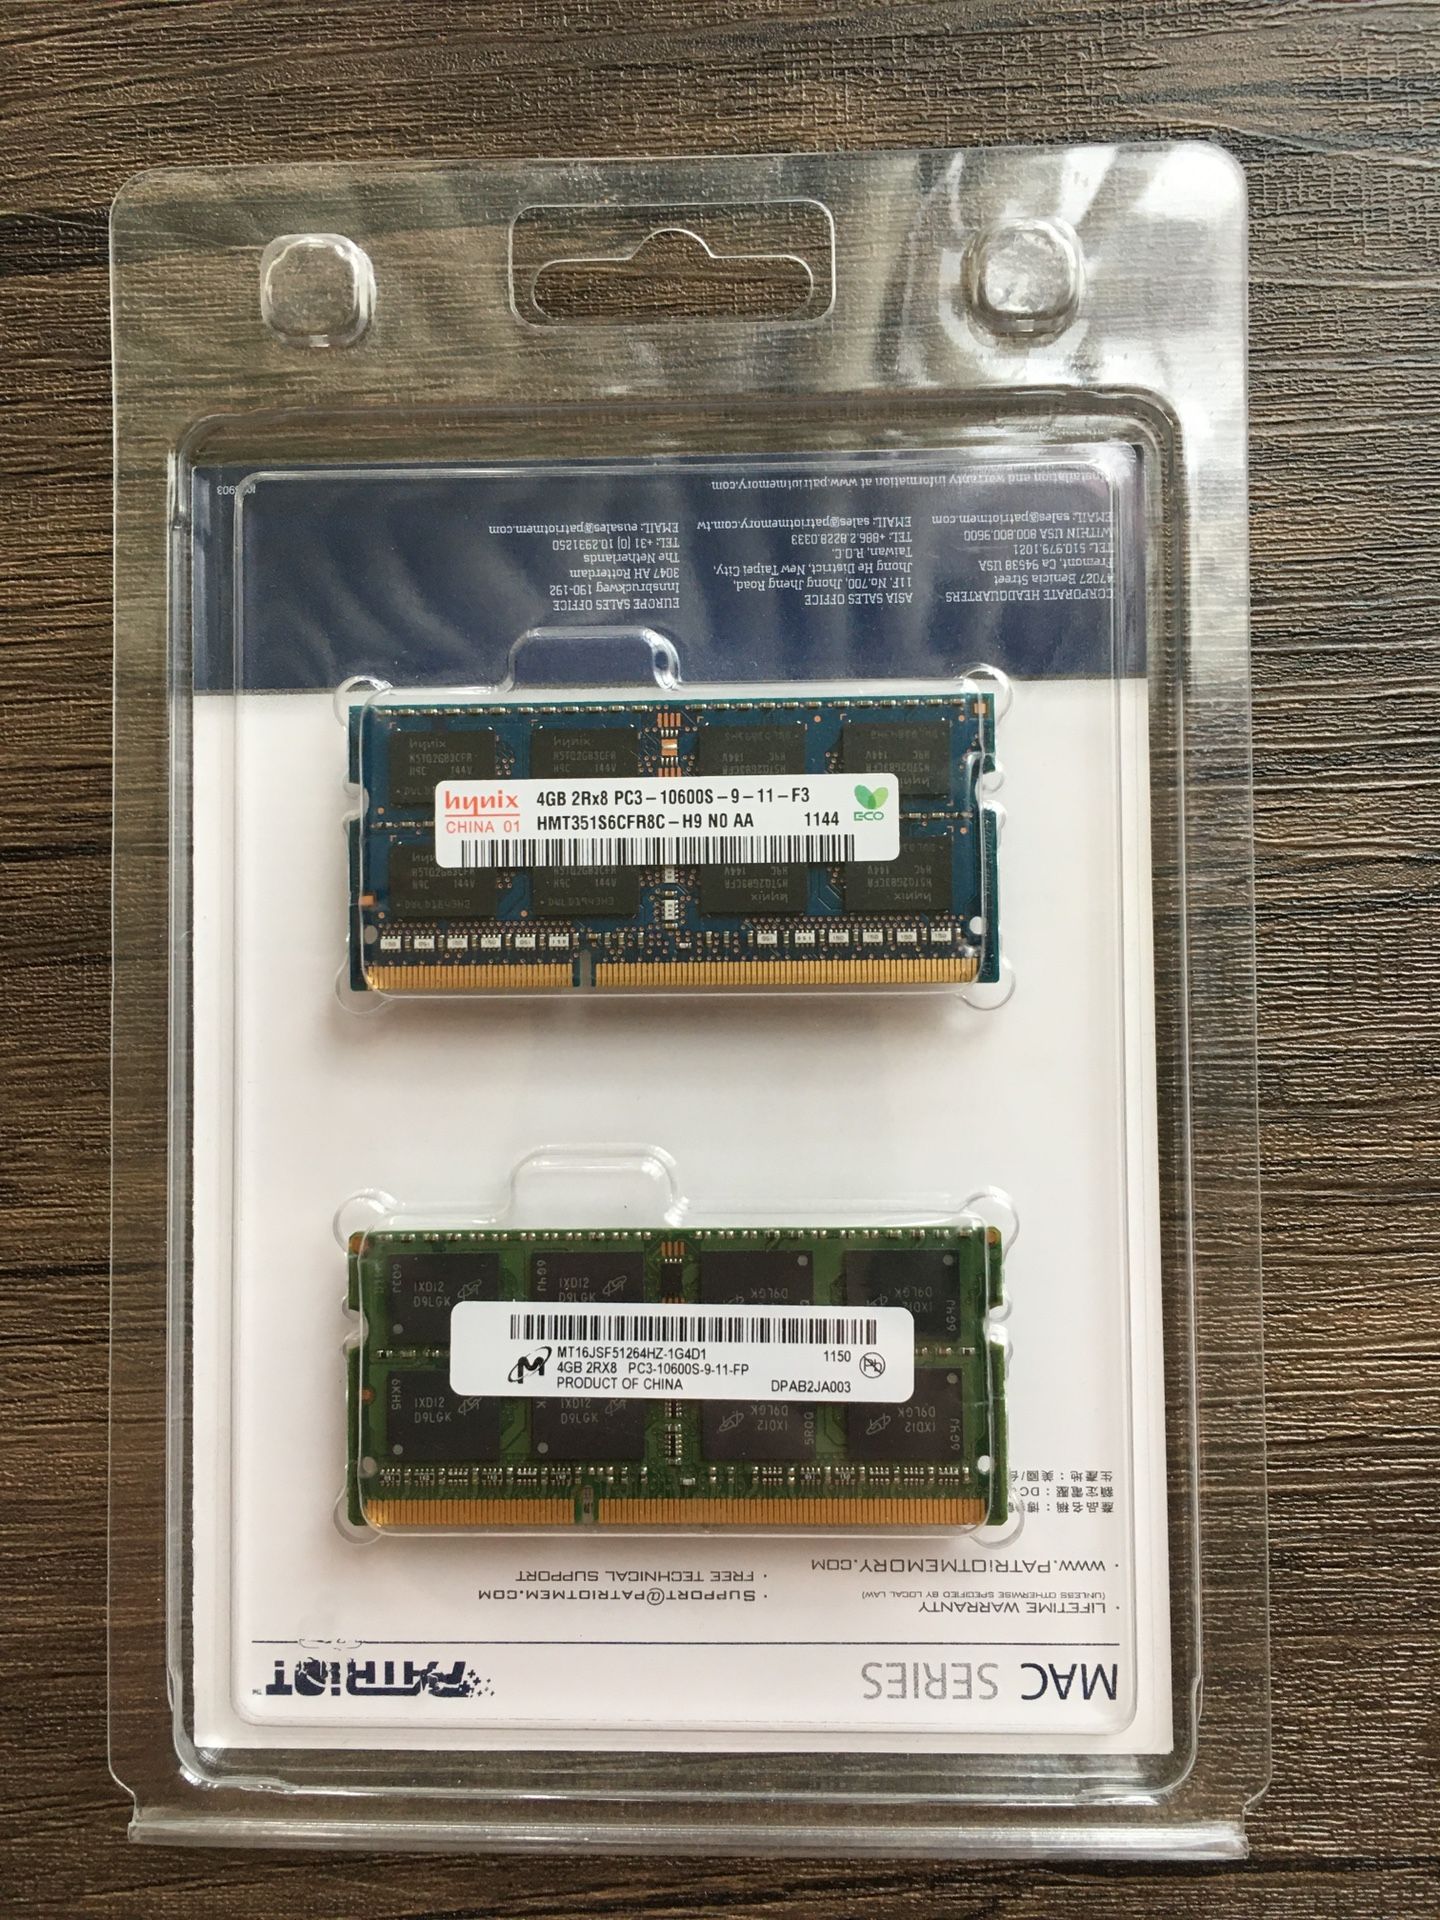 2 x 4GB  (8GB) DDR3 Laptop RAM - PC3 10600 - hunix + lenovo - If the listing is up and you can see it, that means the item is available - Pickup pleas